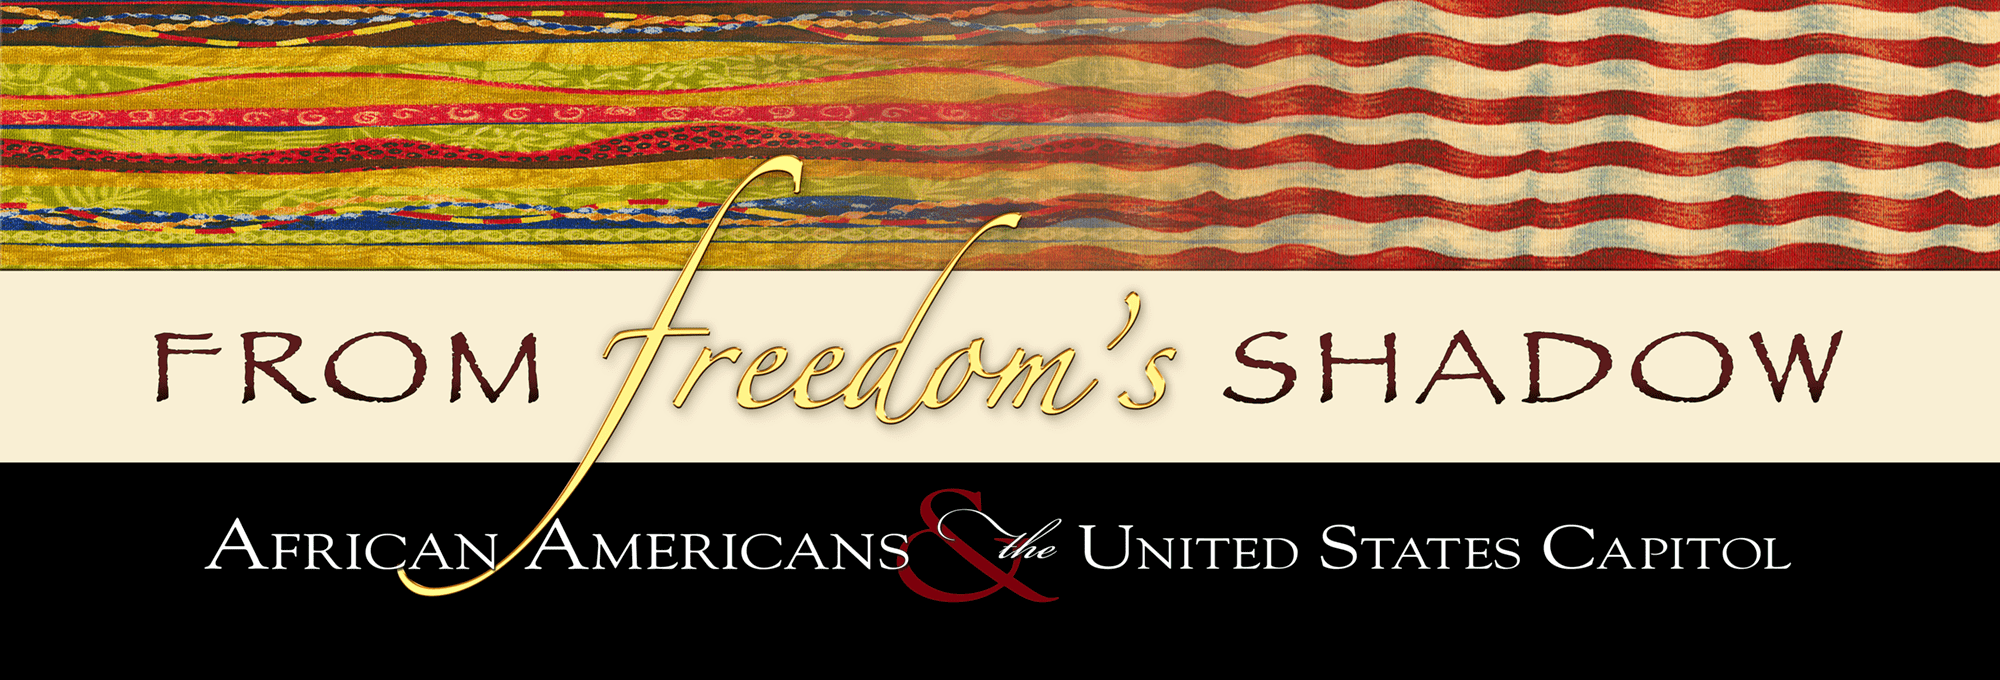 From Freedom's Shadow: African Americans & the United States Capitol